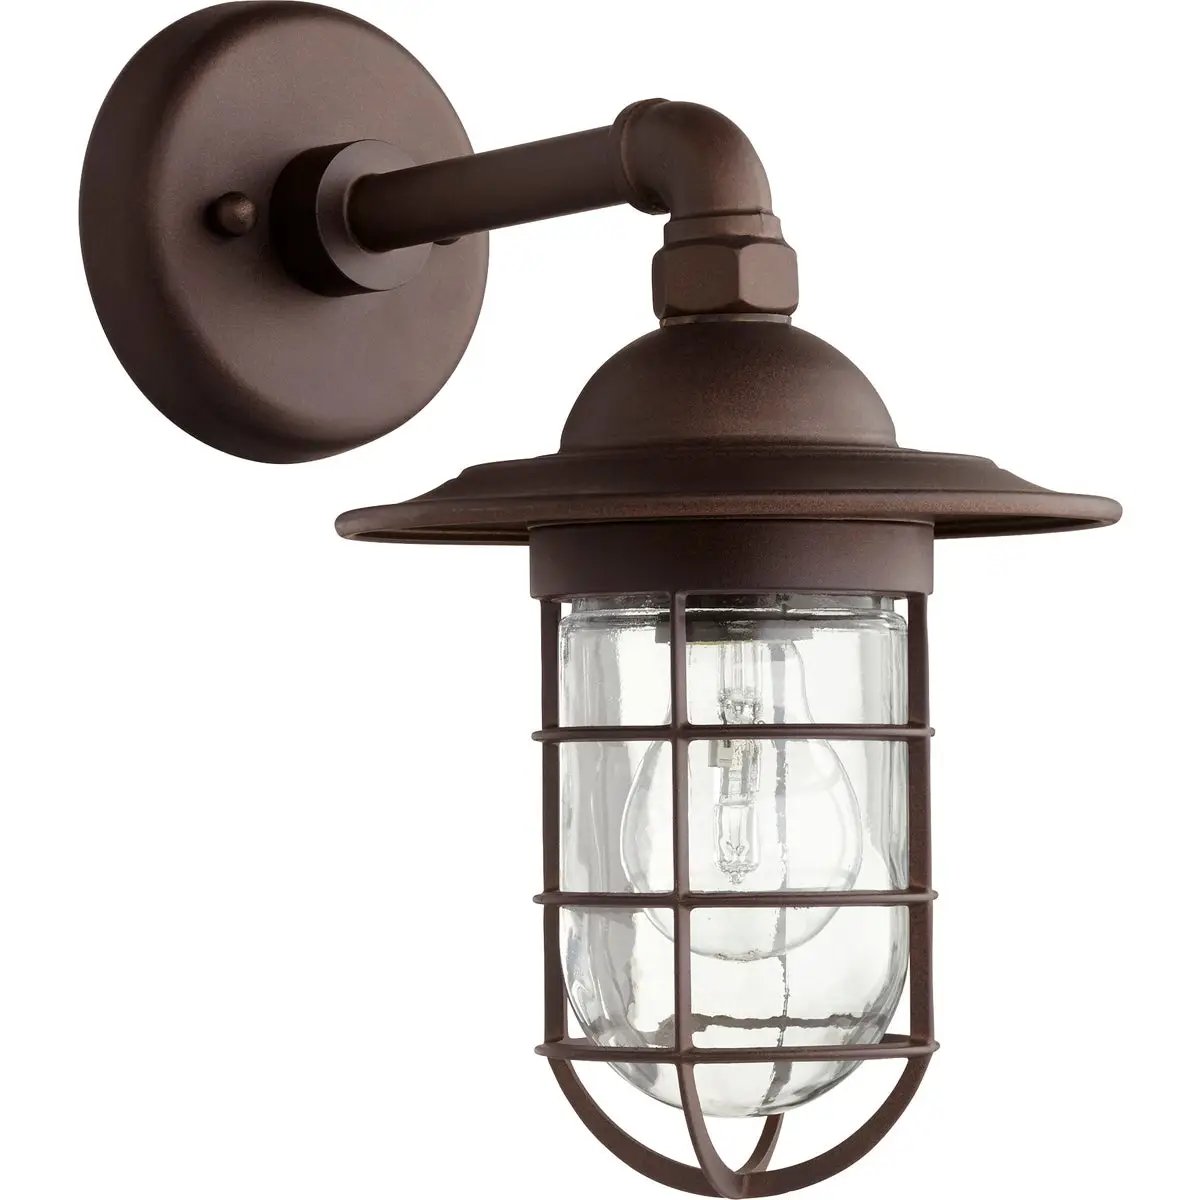 Coastal Outdoor Wall Light with Cage Enclosure and Clear Glass, perfect for coastal and rustic outdoor settings. Provides eye-catching illumination for front or back entryway, garage door. Brand: Quorum International. Wattage: 60W. Input Voltage: 120V. Bulbs: 1 (not included). Bulb Base Type: Medium E26. Dimmable. Certifications: UL Listed. Safety Rating: Wet Location. Finish: Noir, Oiled Bronze. Dimensions: 7.5"W x 12.25"H x 12"E. Warranty: 2 Years.